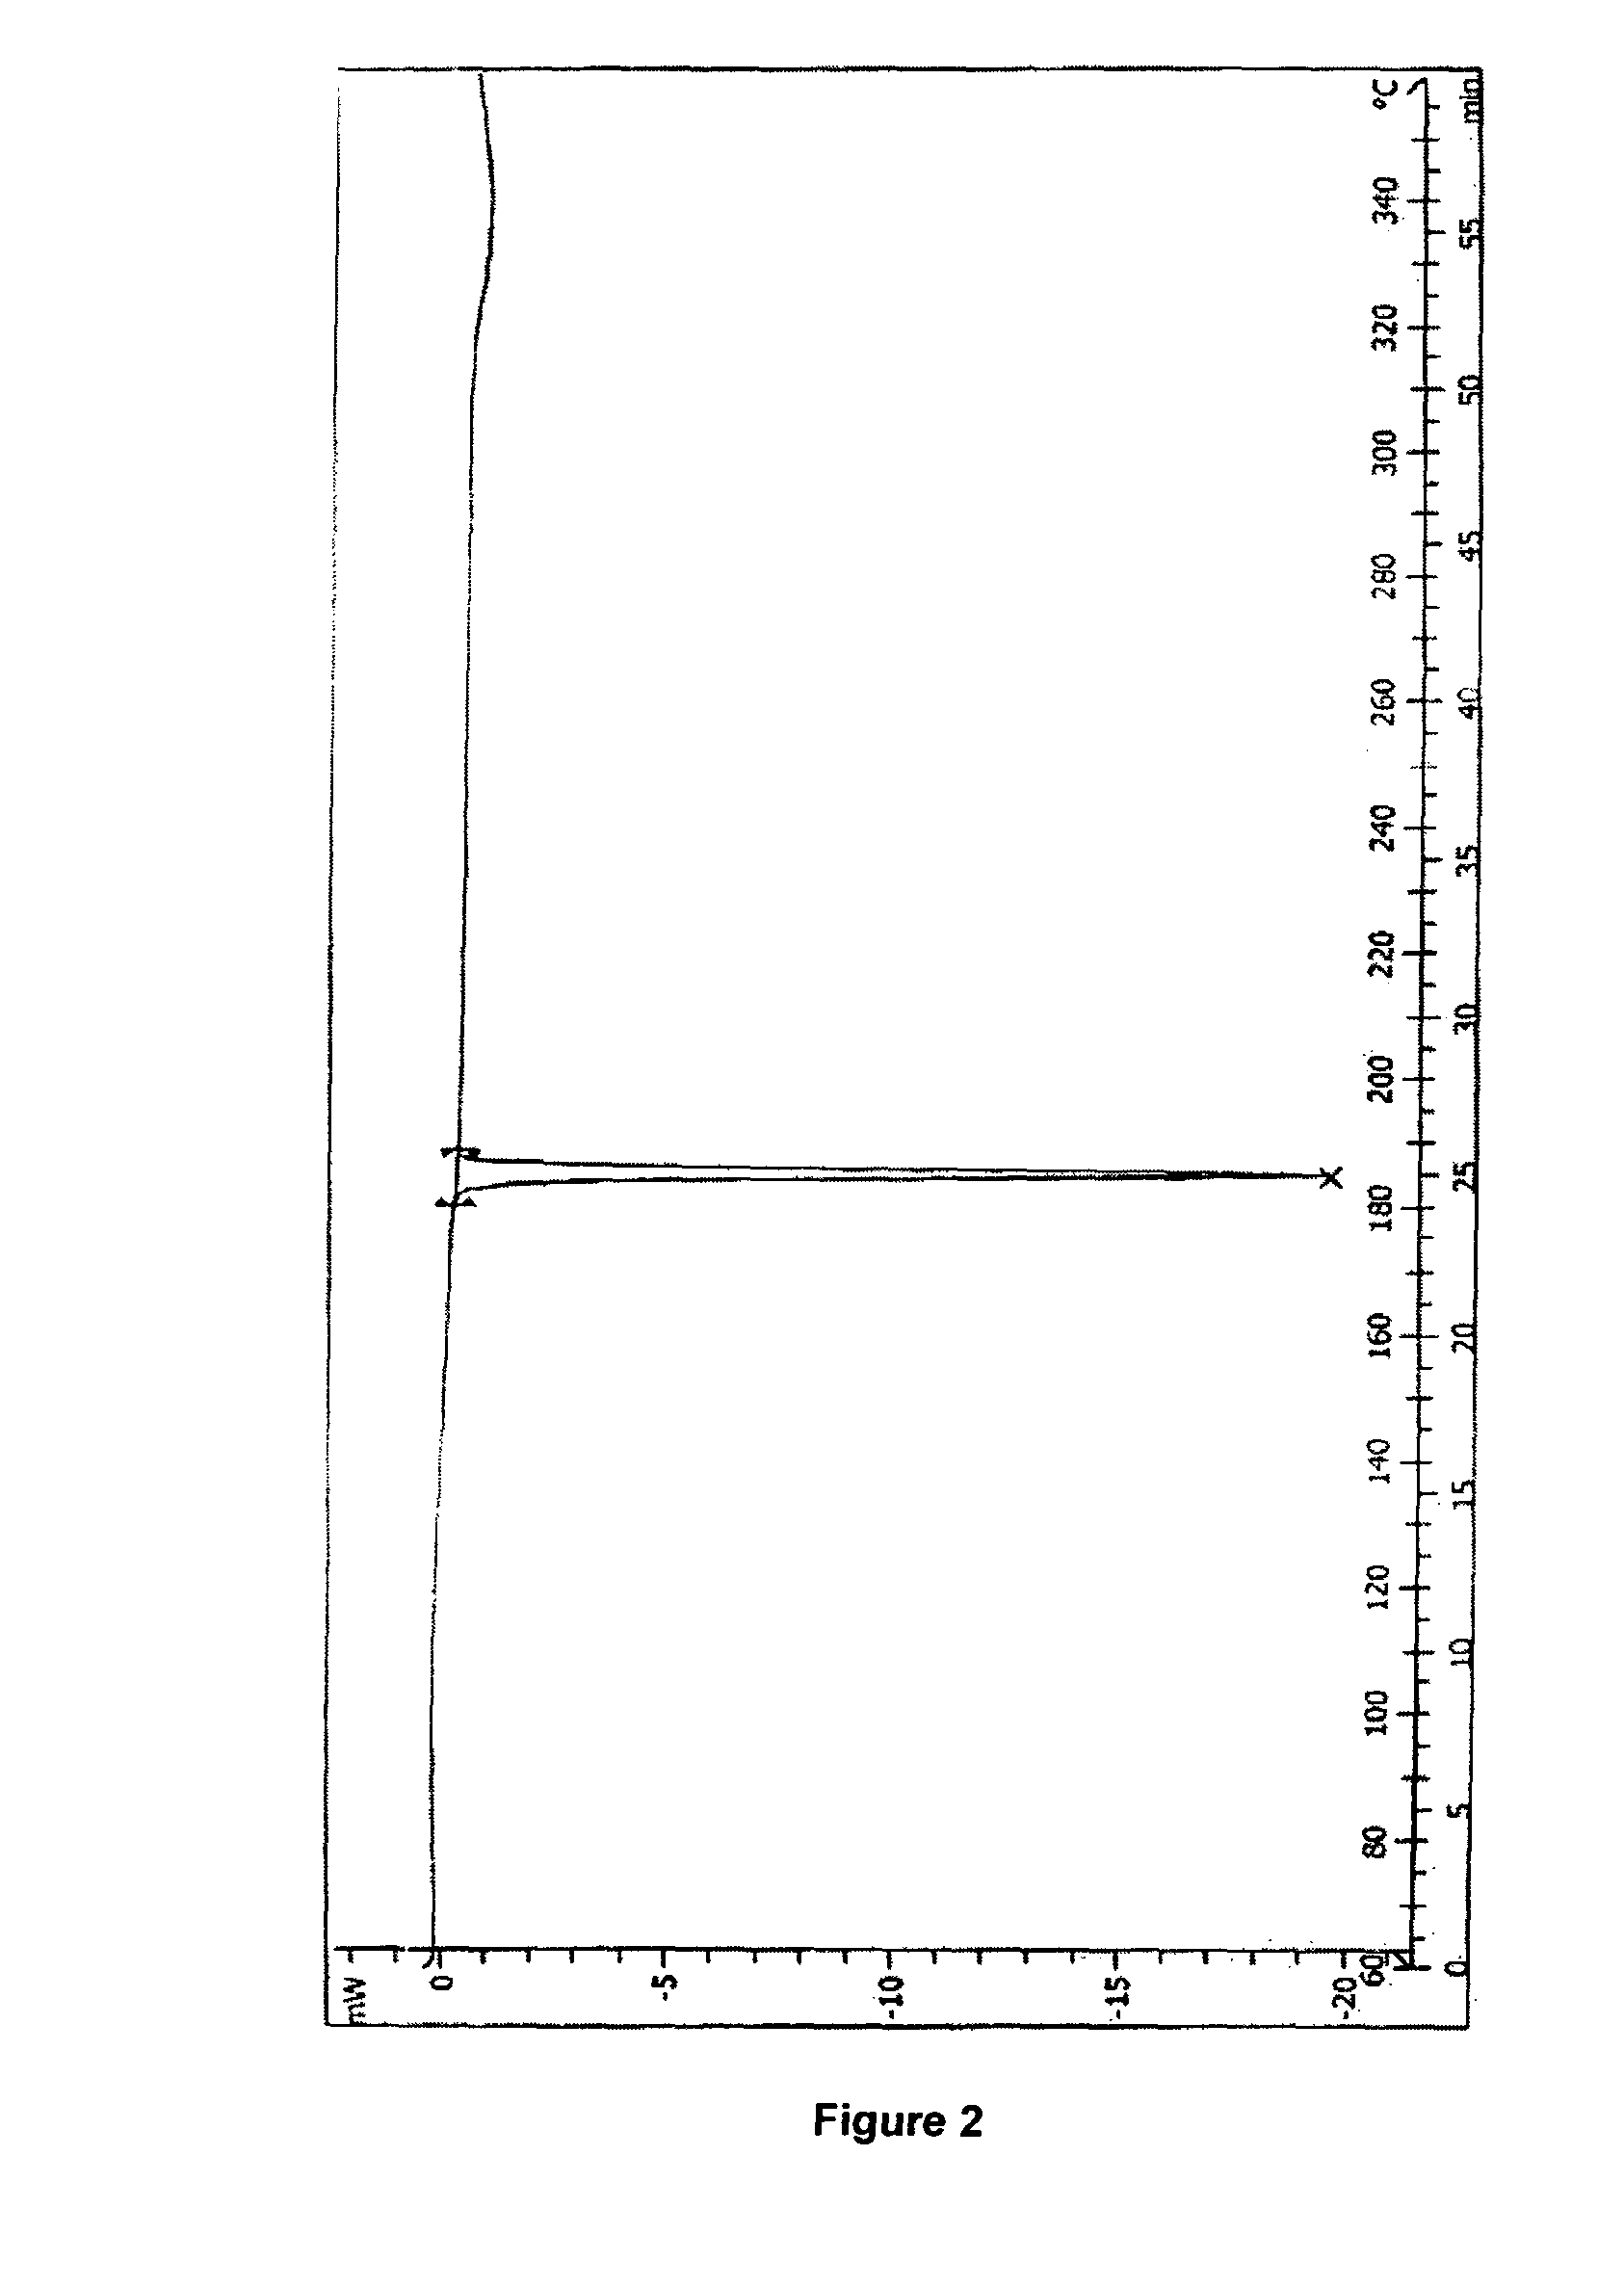 Process for preparation of letrozole and its intermediates